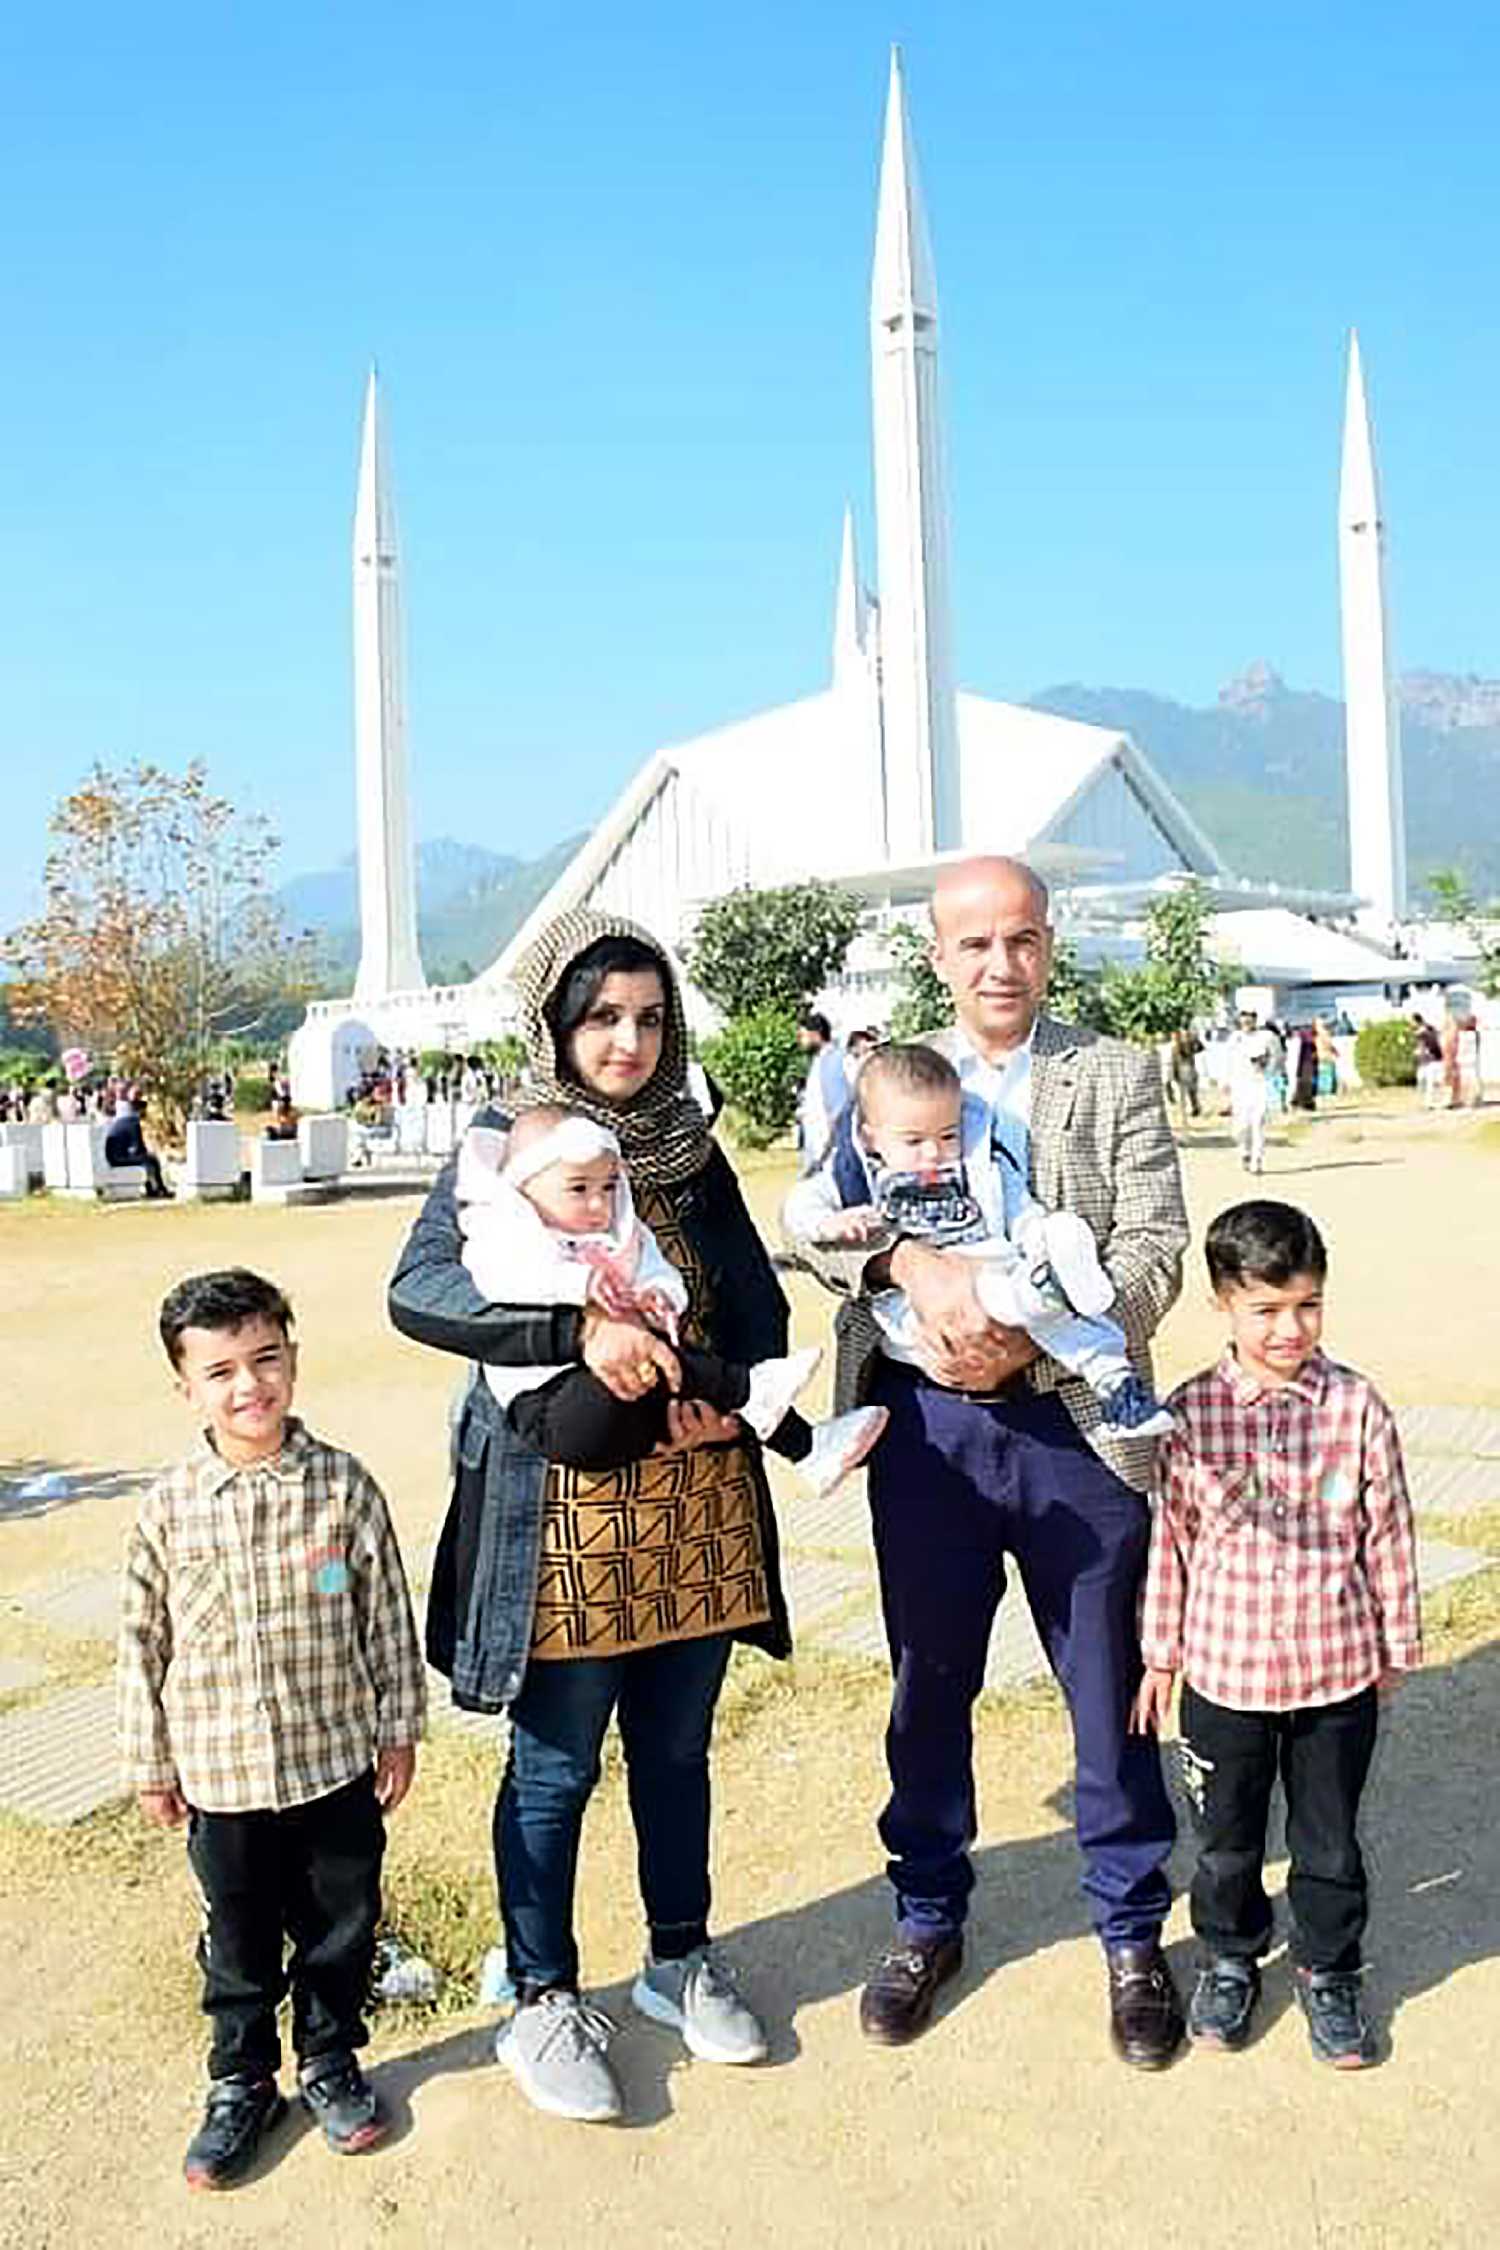 The entire family together in Islamabad.